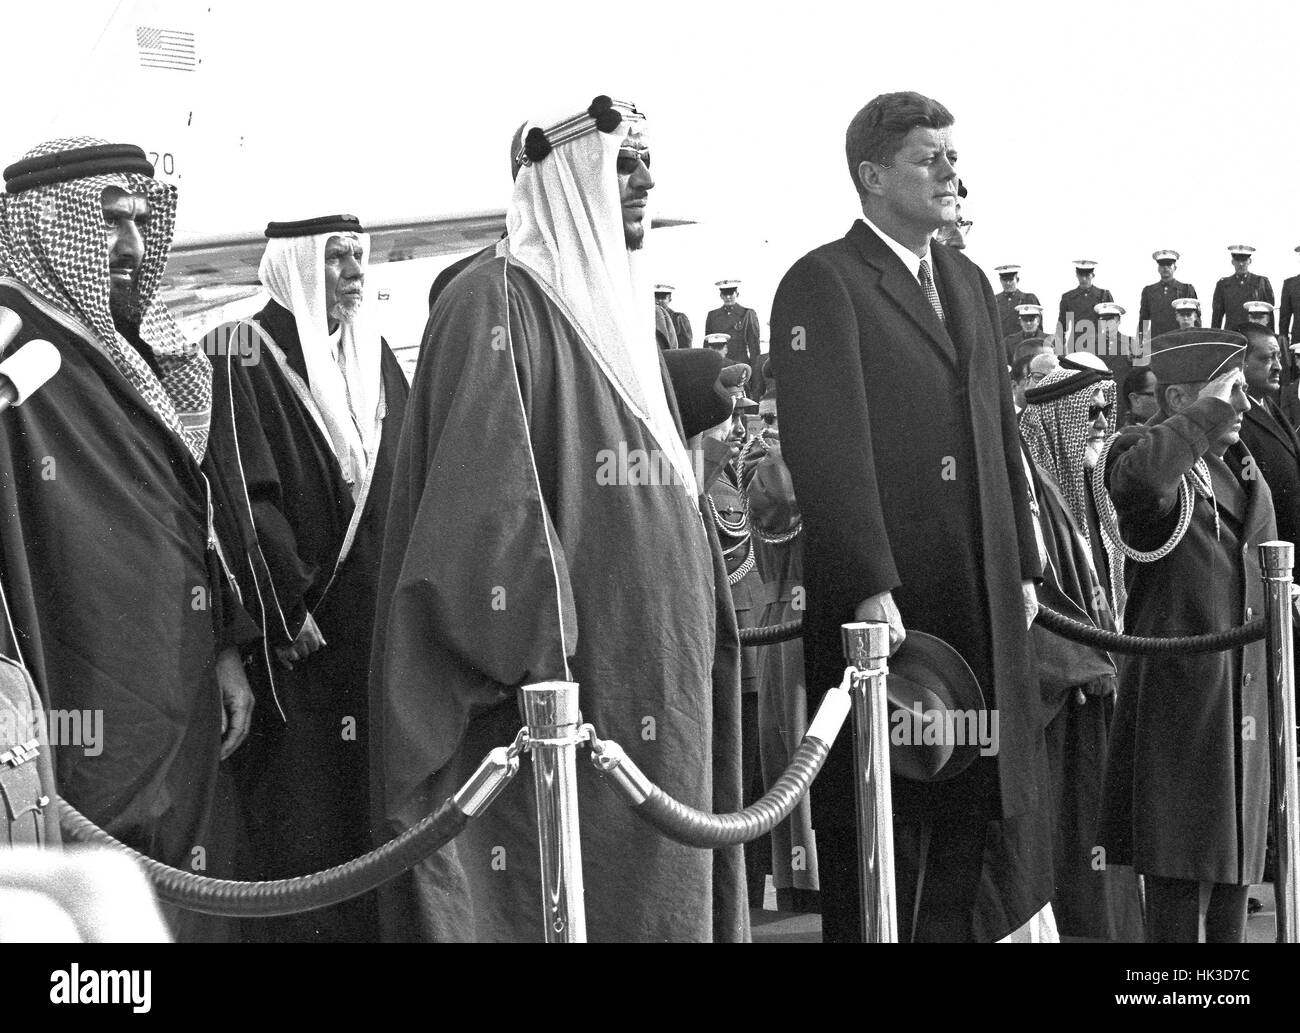 King Saud bin Abdulaziz Al Saud of Saudi Arabia makes remarks as he is welcomed to the United States by US President John F. Kennedy during a ceremony at Andrews Air Force Base, Maryland on February 13, 1962. From left to right: unidentified, President Ke Stock Photo